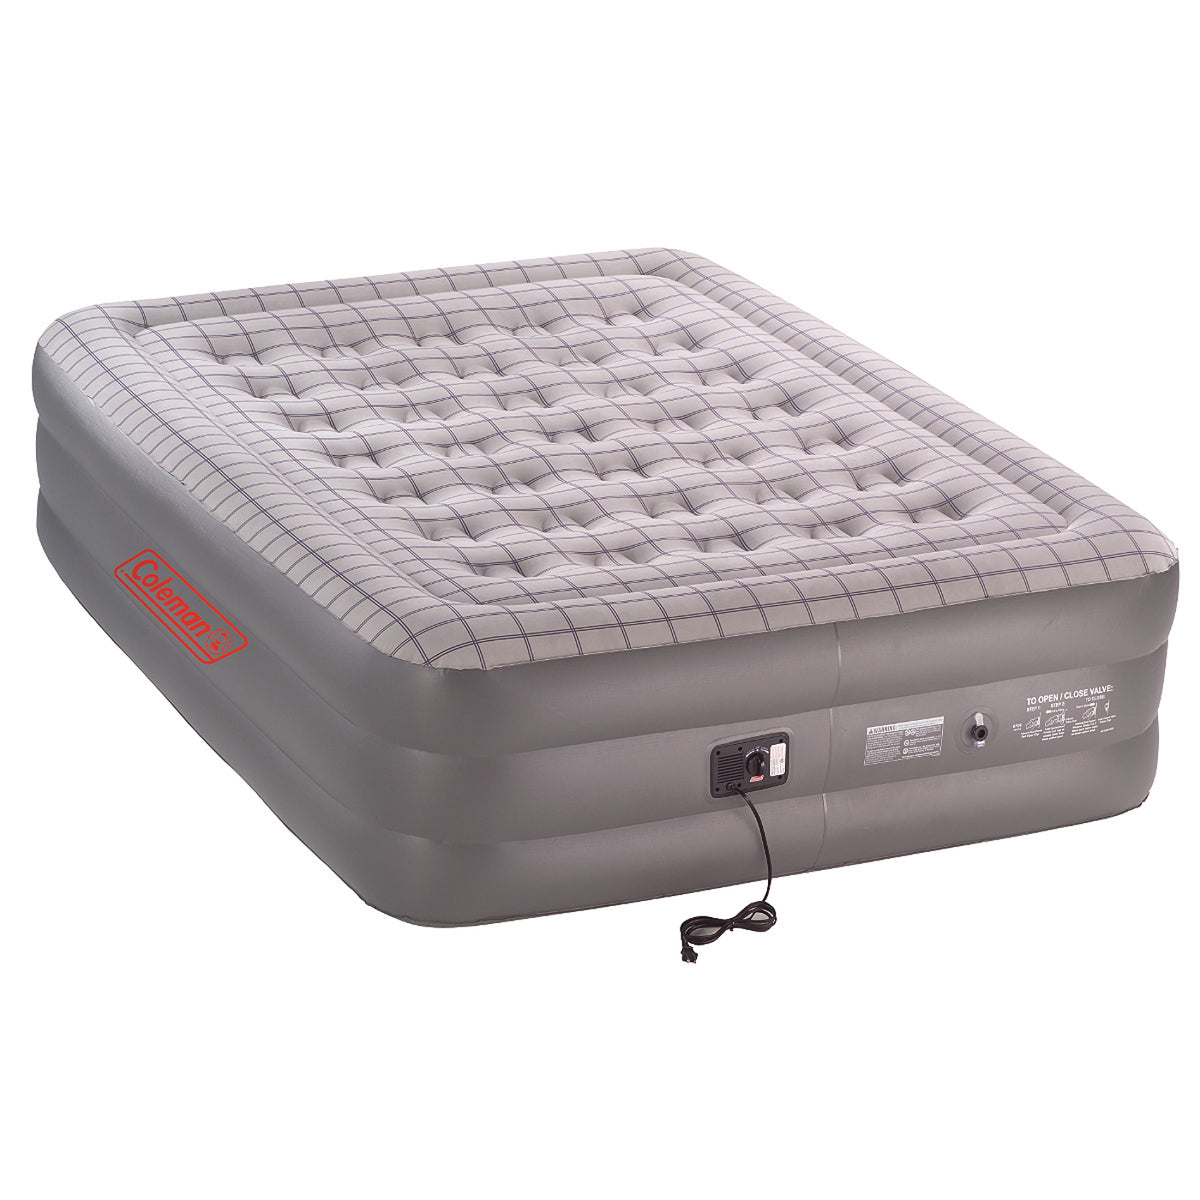 Queen Double High Quickbed Air Mattress With In Built Pump